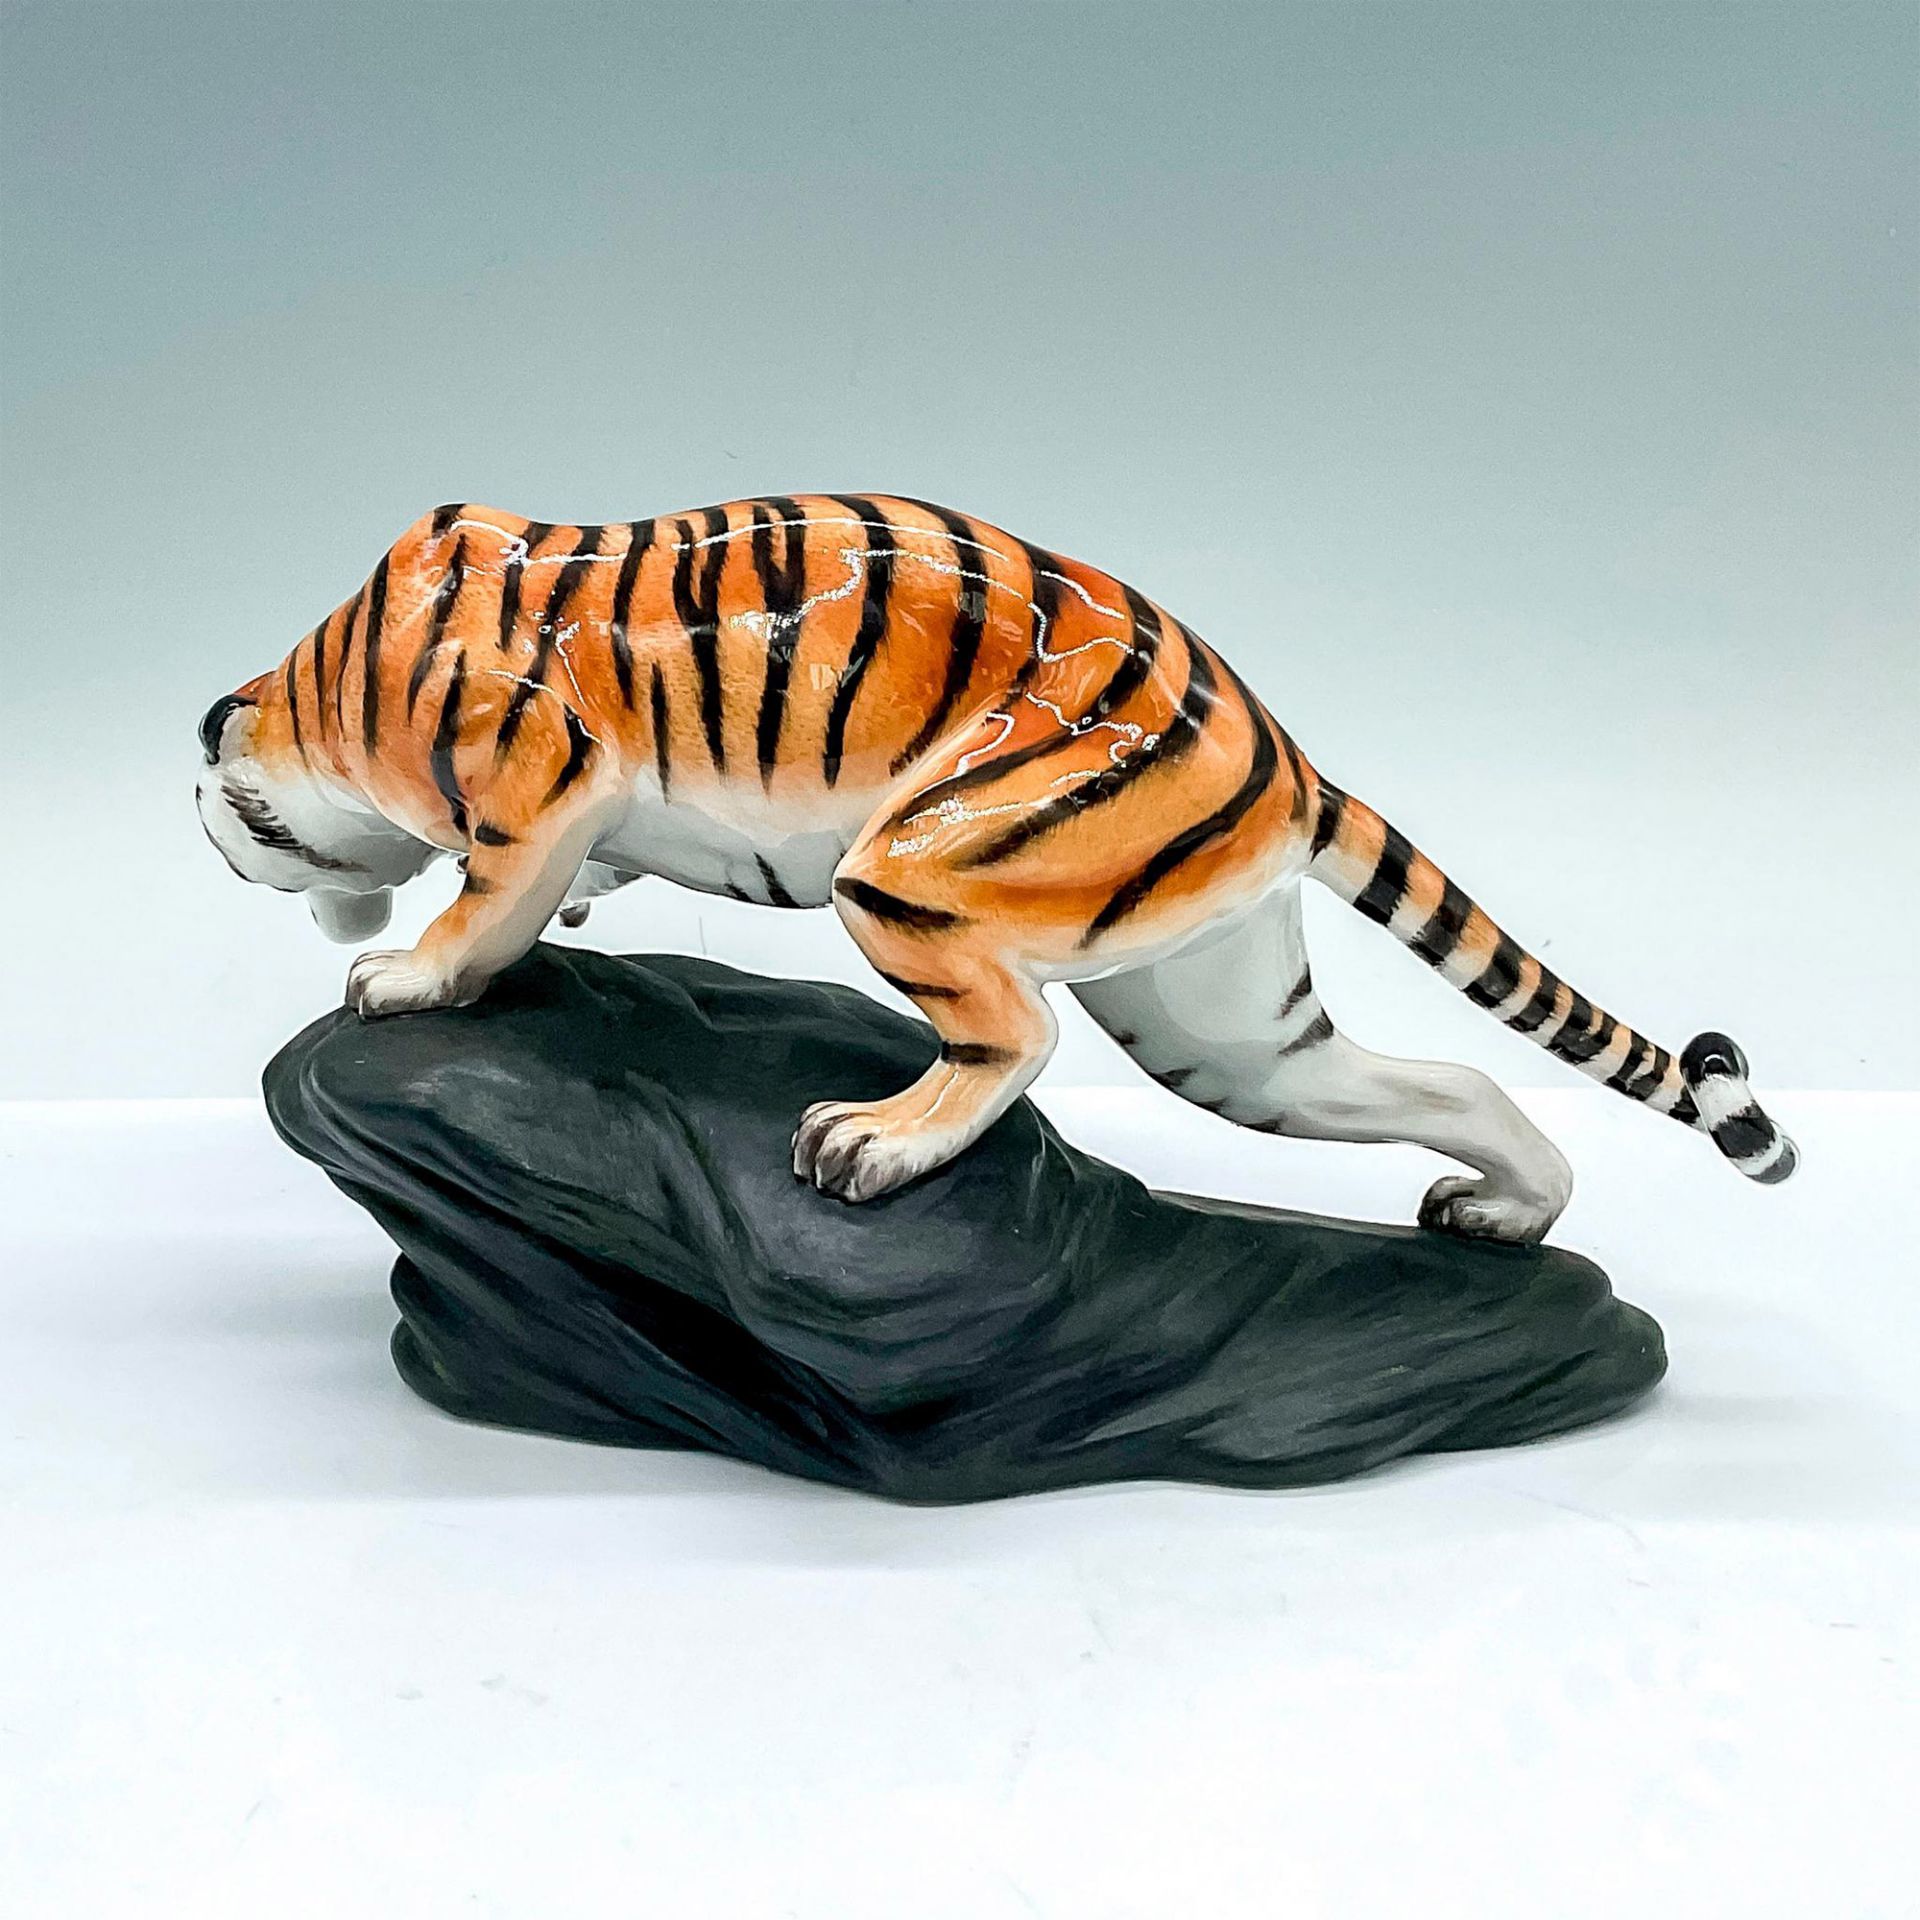 The Tiger On The Rock HN4502 - Royal Doulton Figurine - Image 2 of 3